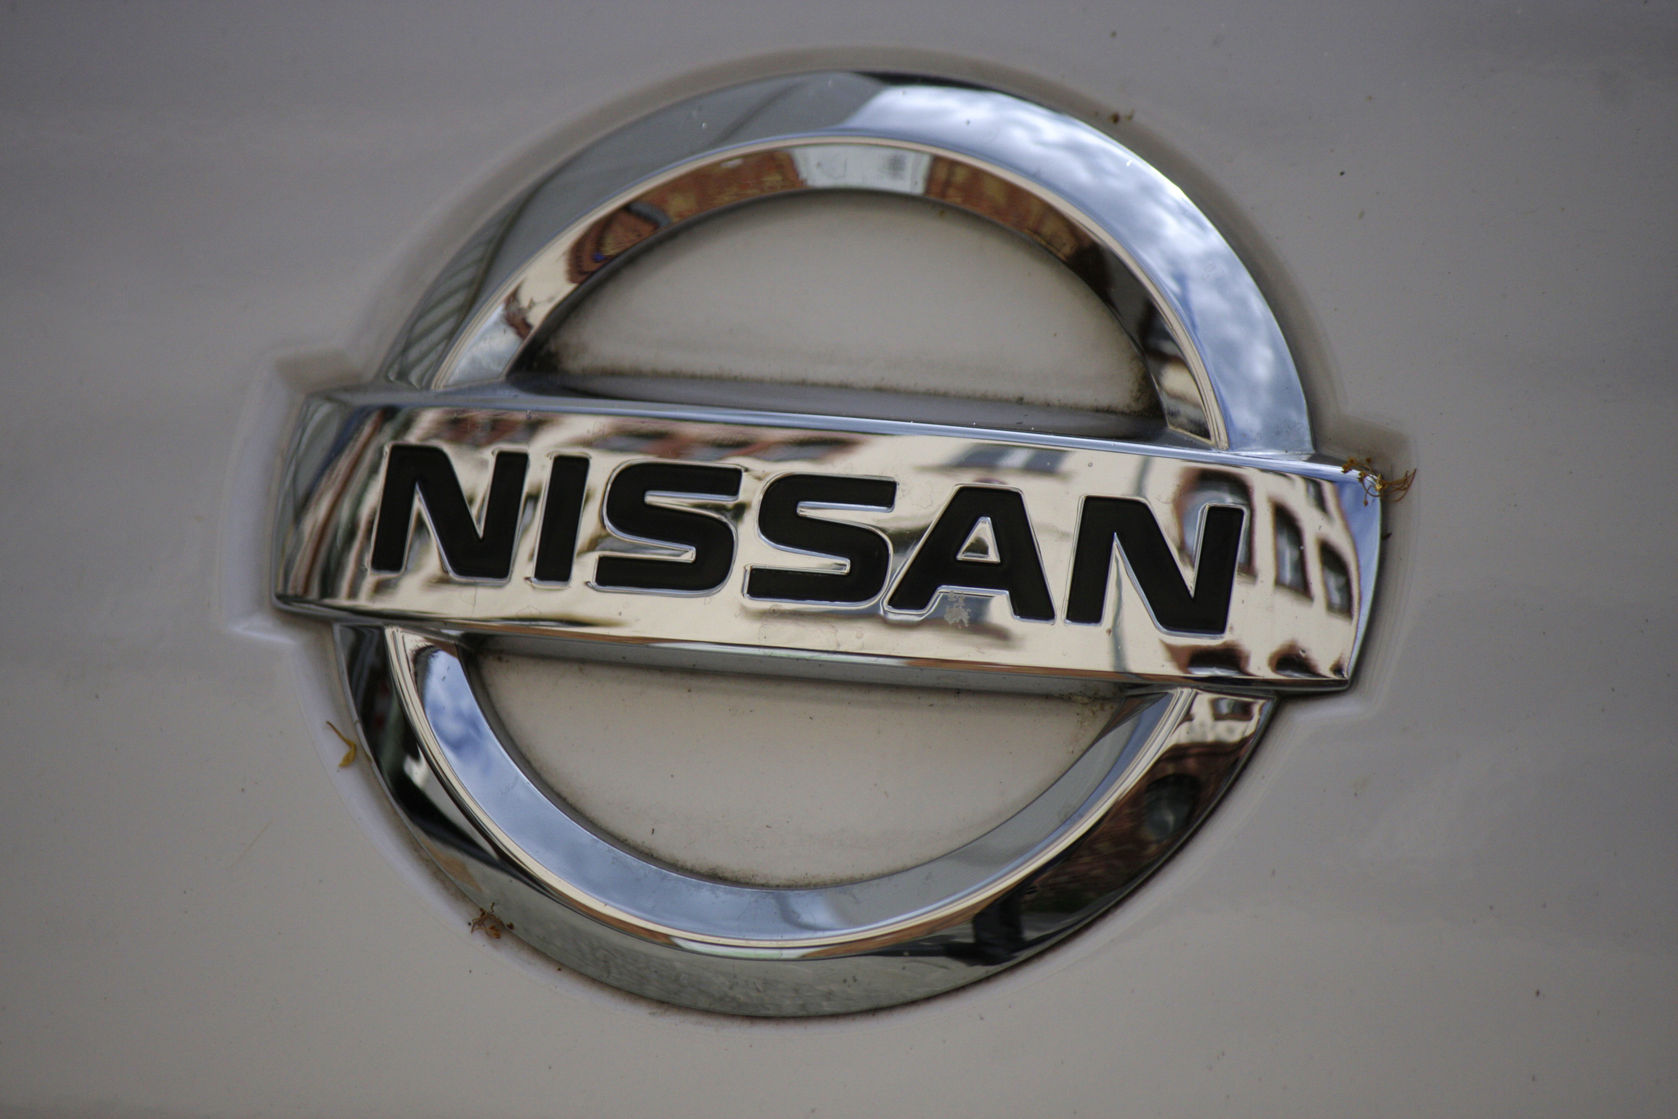 Nissan Variable Compression Gas Engine May Replace Diesels